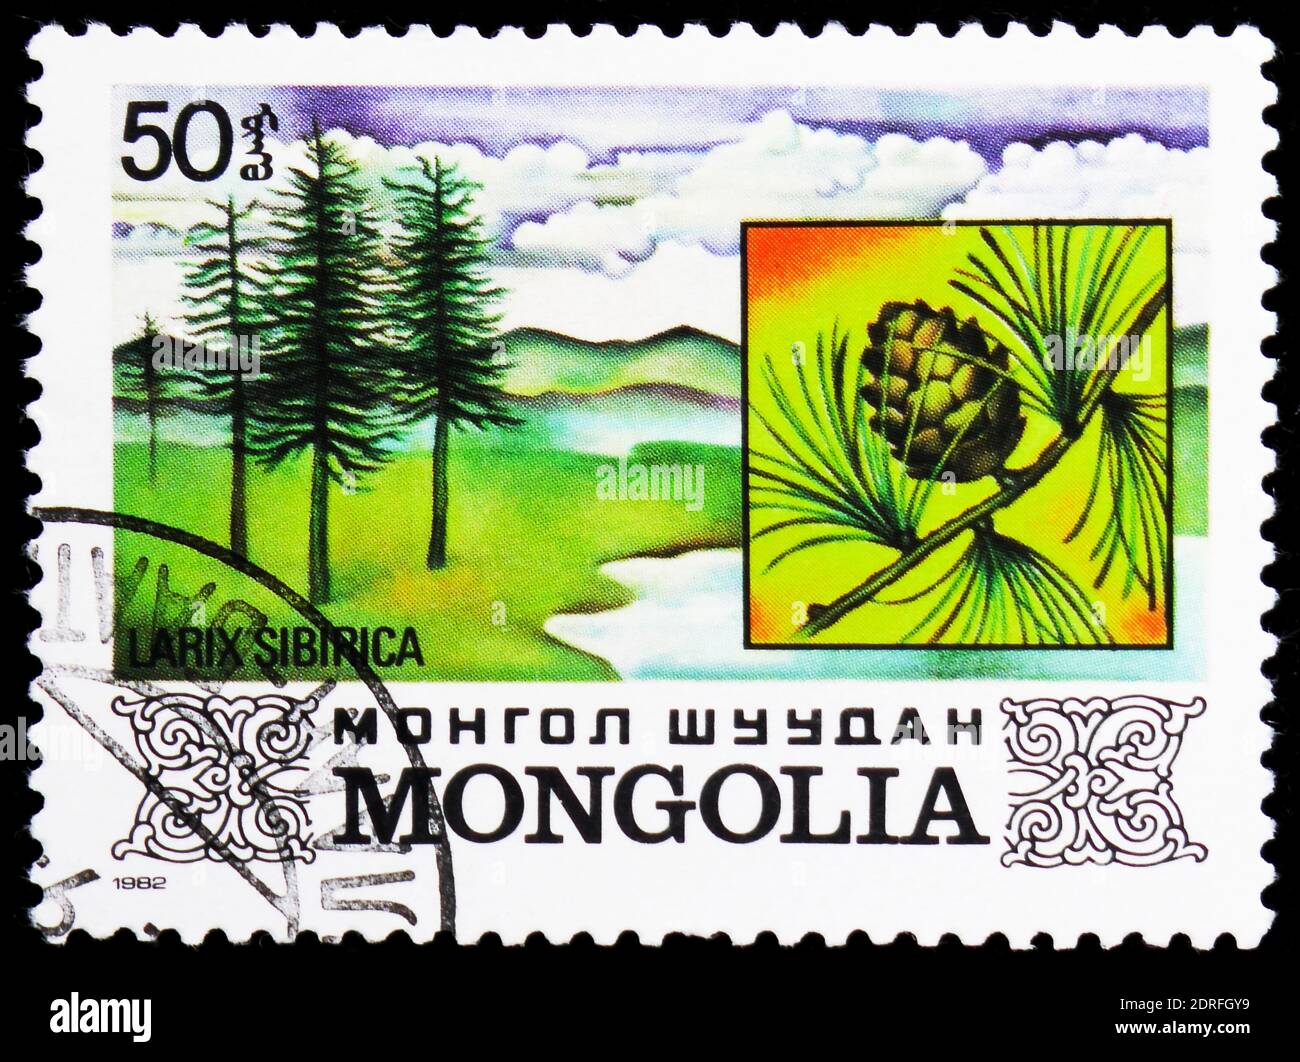 MOSCOW, RUSSIA - JANUARY 4, 2019: A stamp printed in Mongolia shows Larix sibirica, Flora serie, circa 1982 Stock Photo